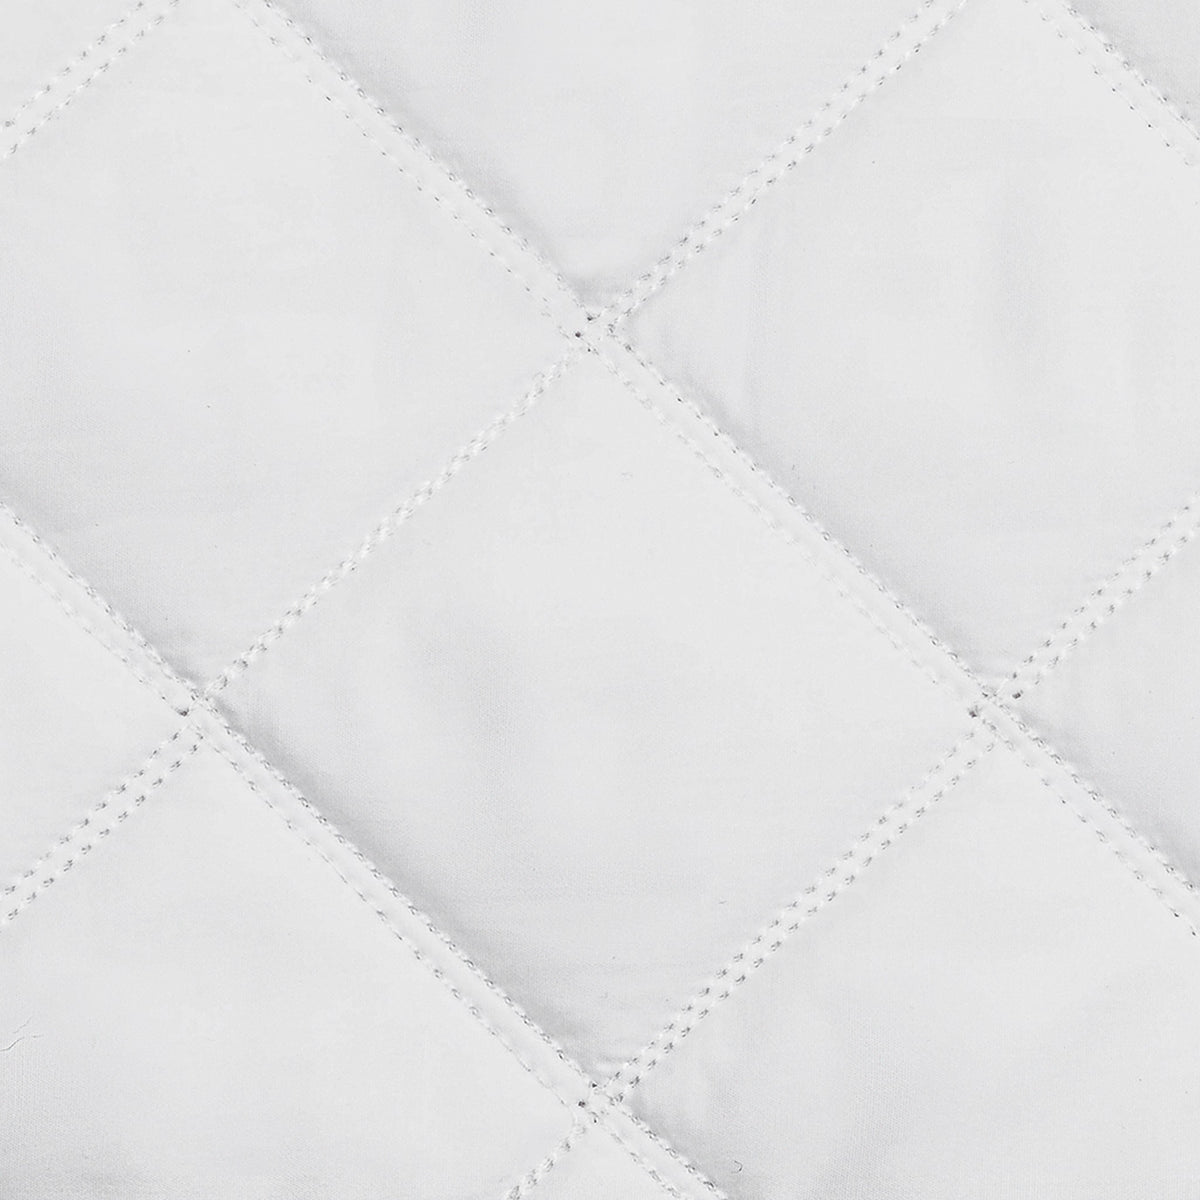 Swatch Sample of Matouk Milano Quilt Bedding in Color White